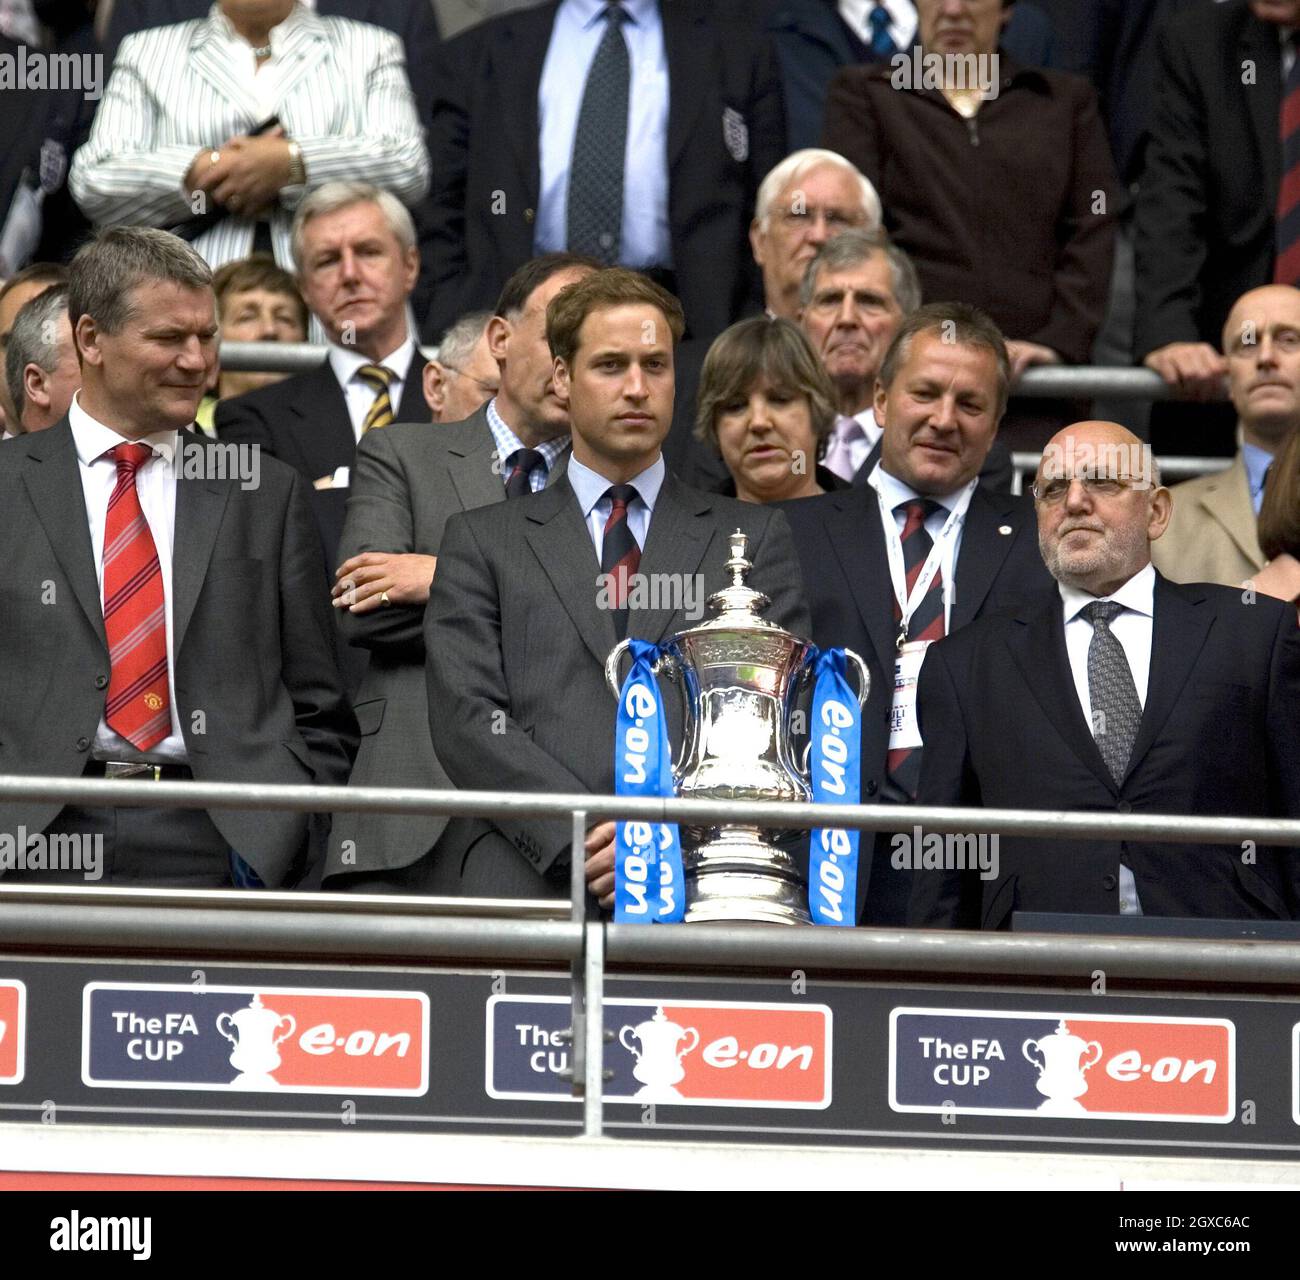 Prince William, President of the Football Association, waits to present the FA Cup to Chelsea at the new Wembley Stadium, London on May 19, 2007. Stock Photo